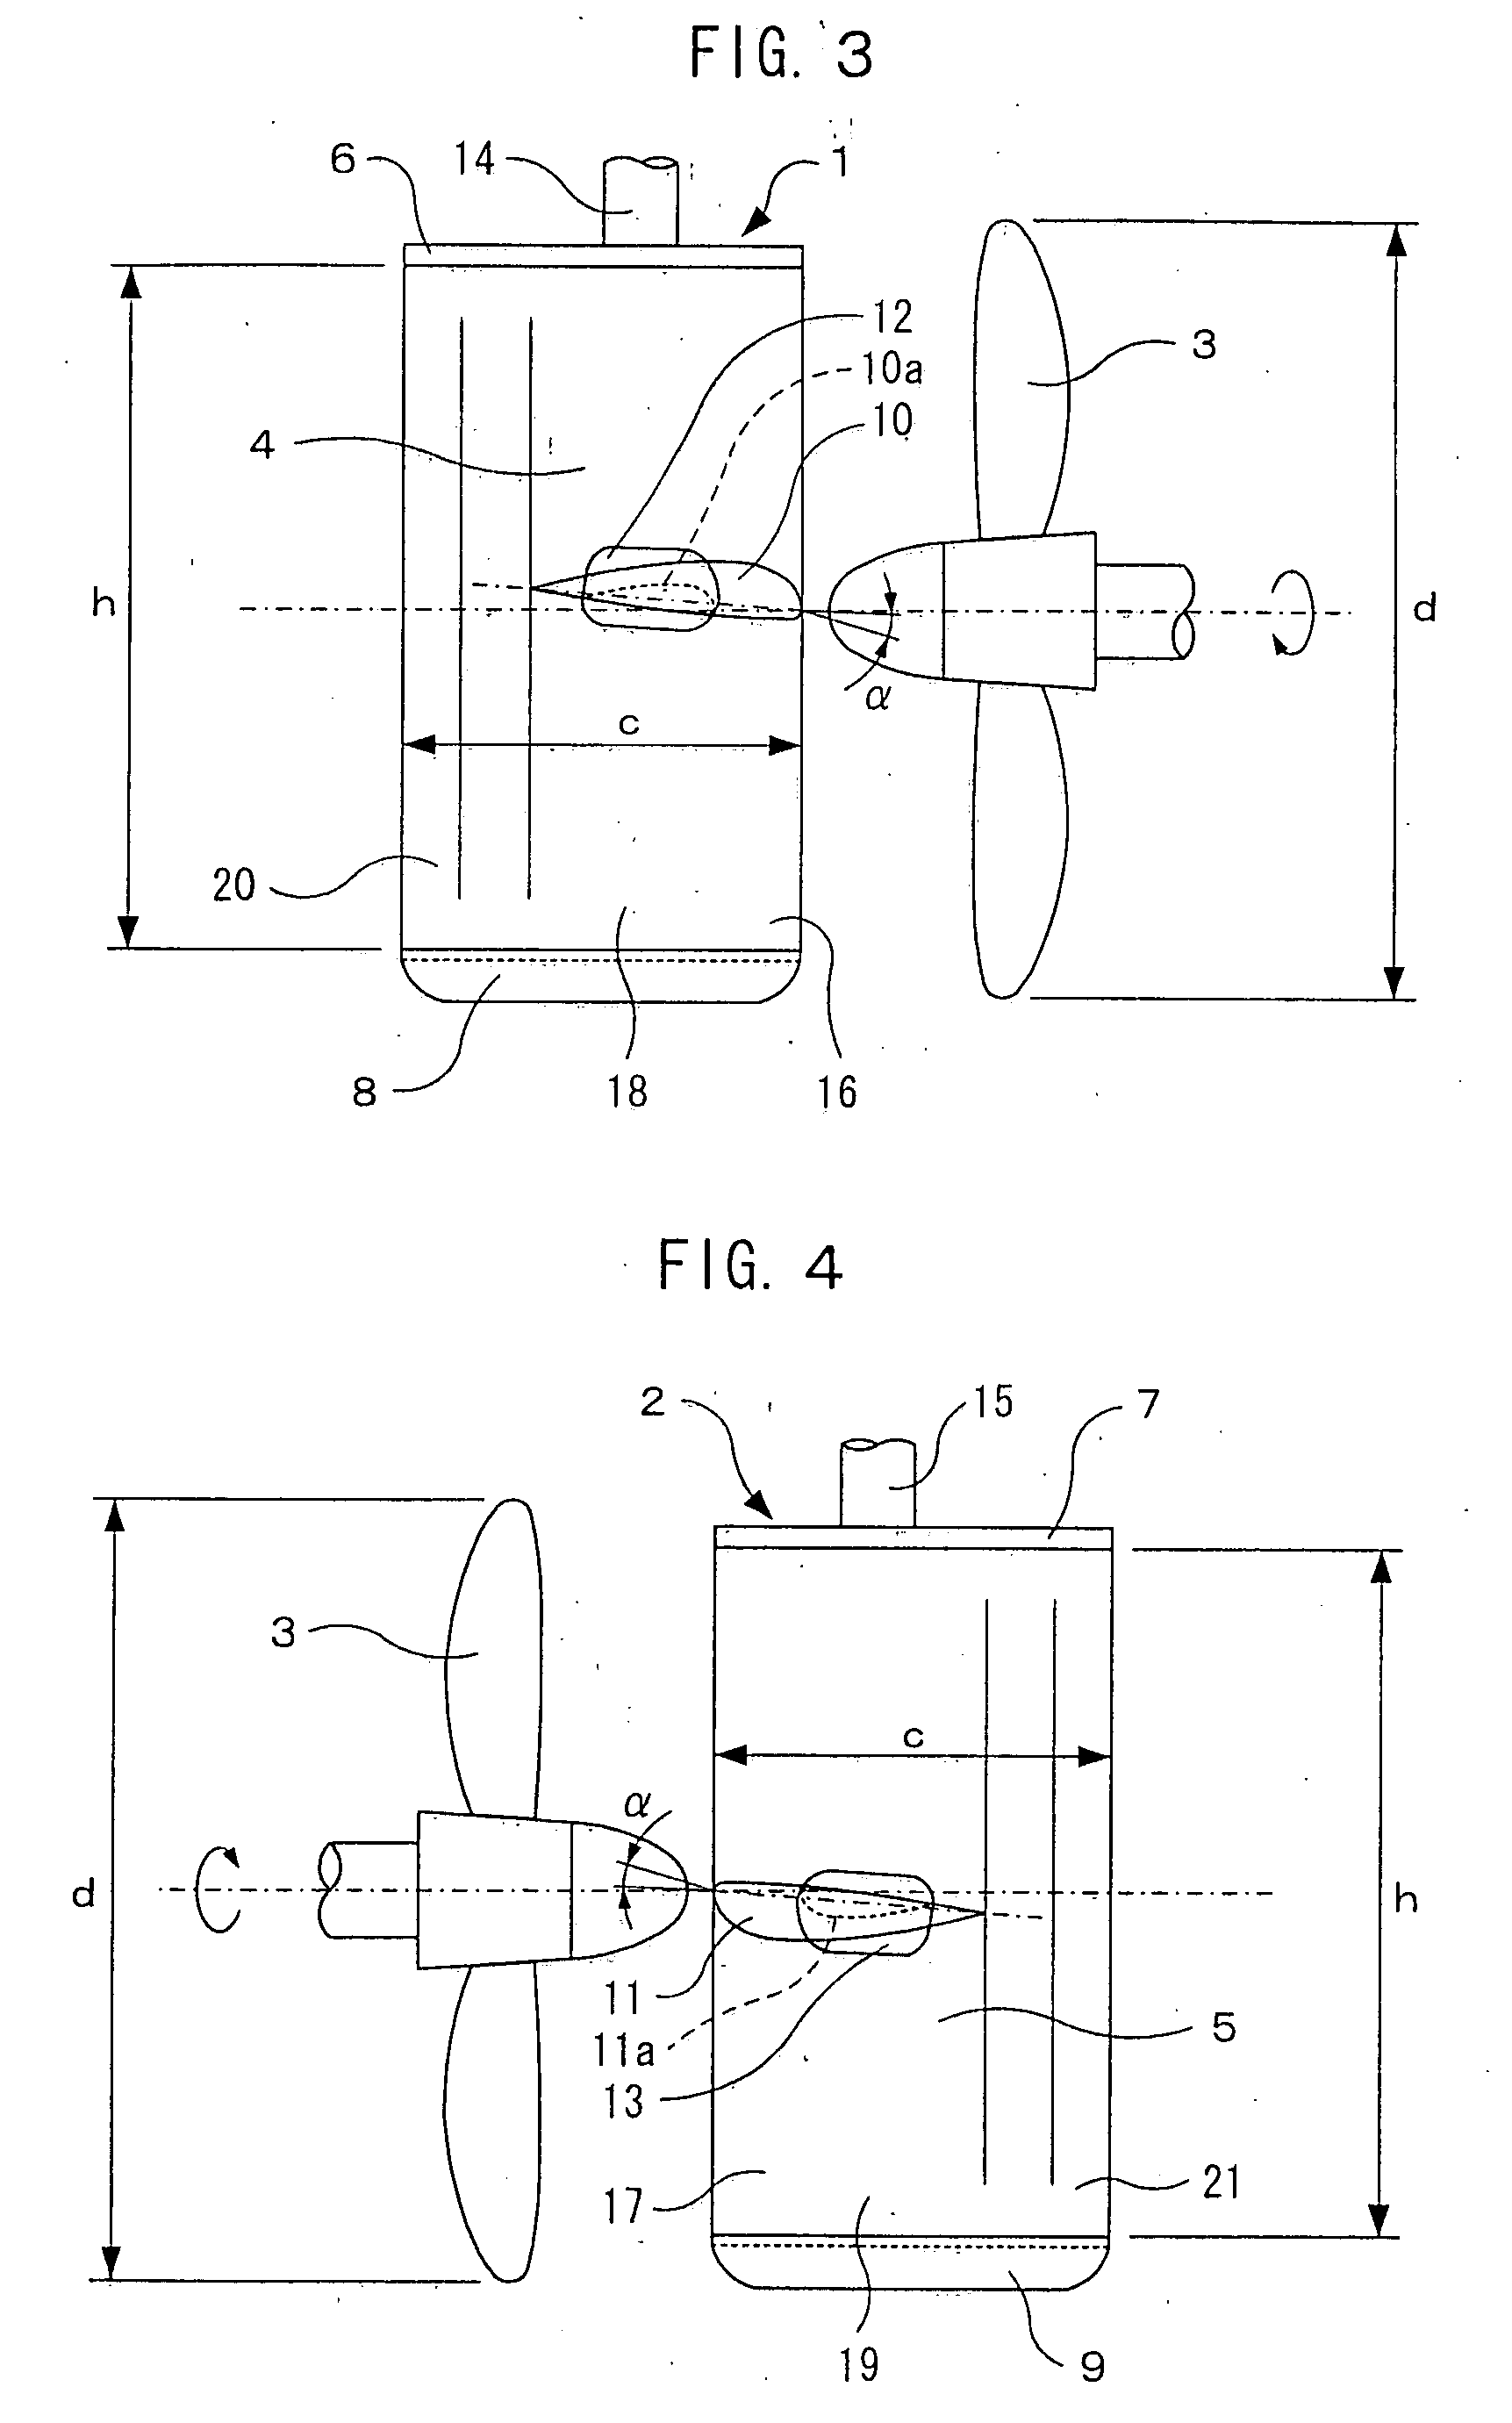 Twin-rudder system for large ship